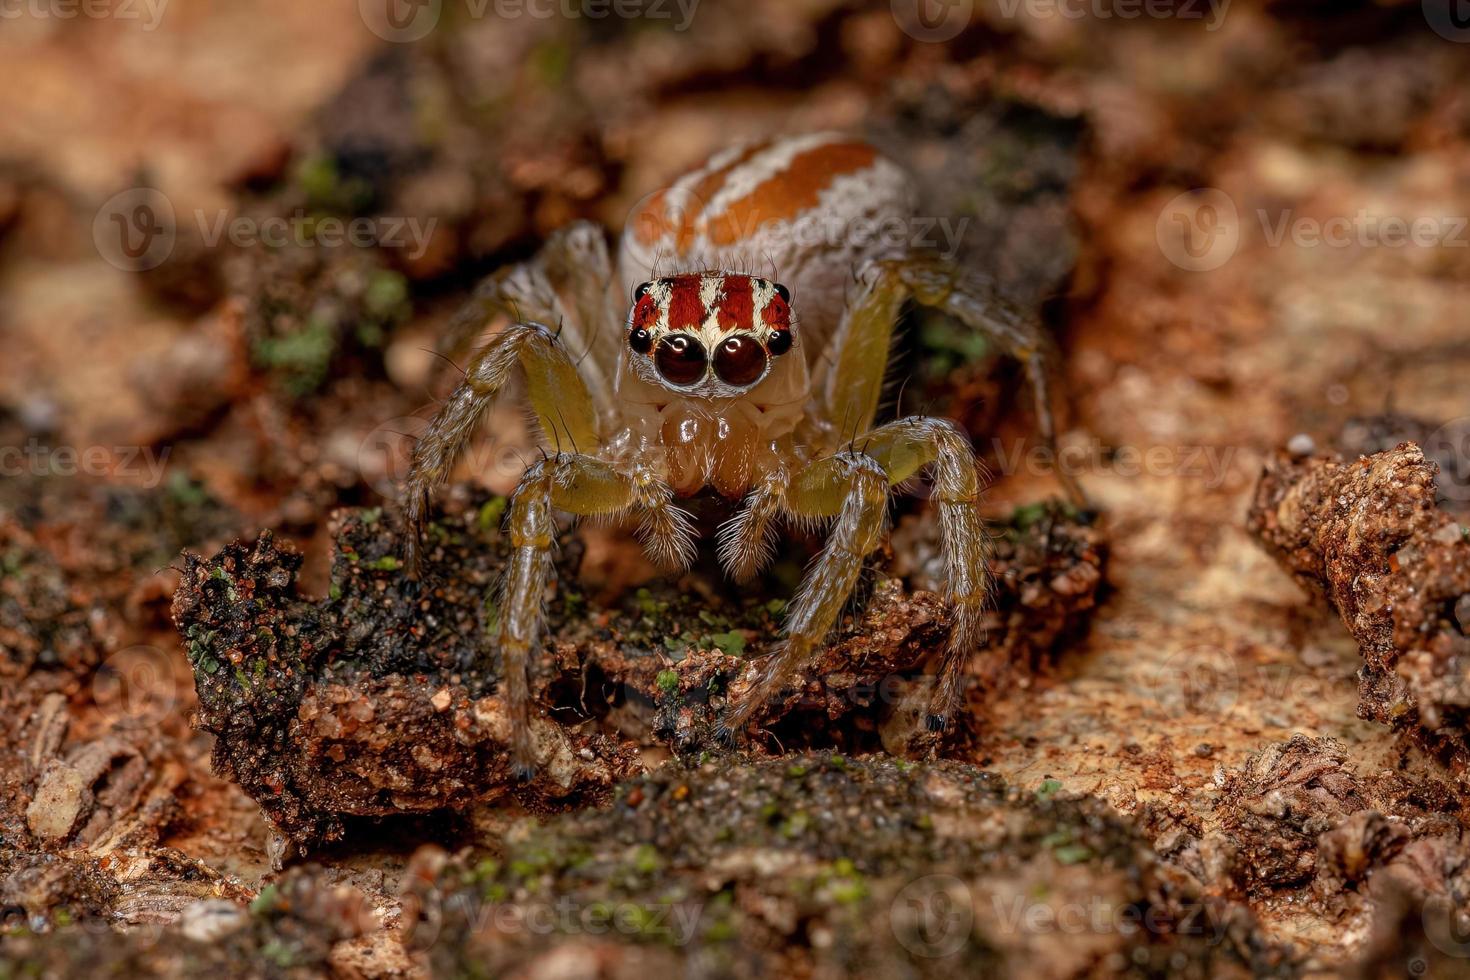 Adult Female Jumping Spider photo